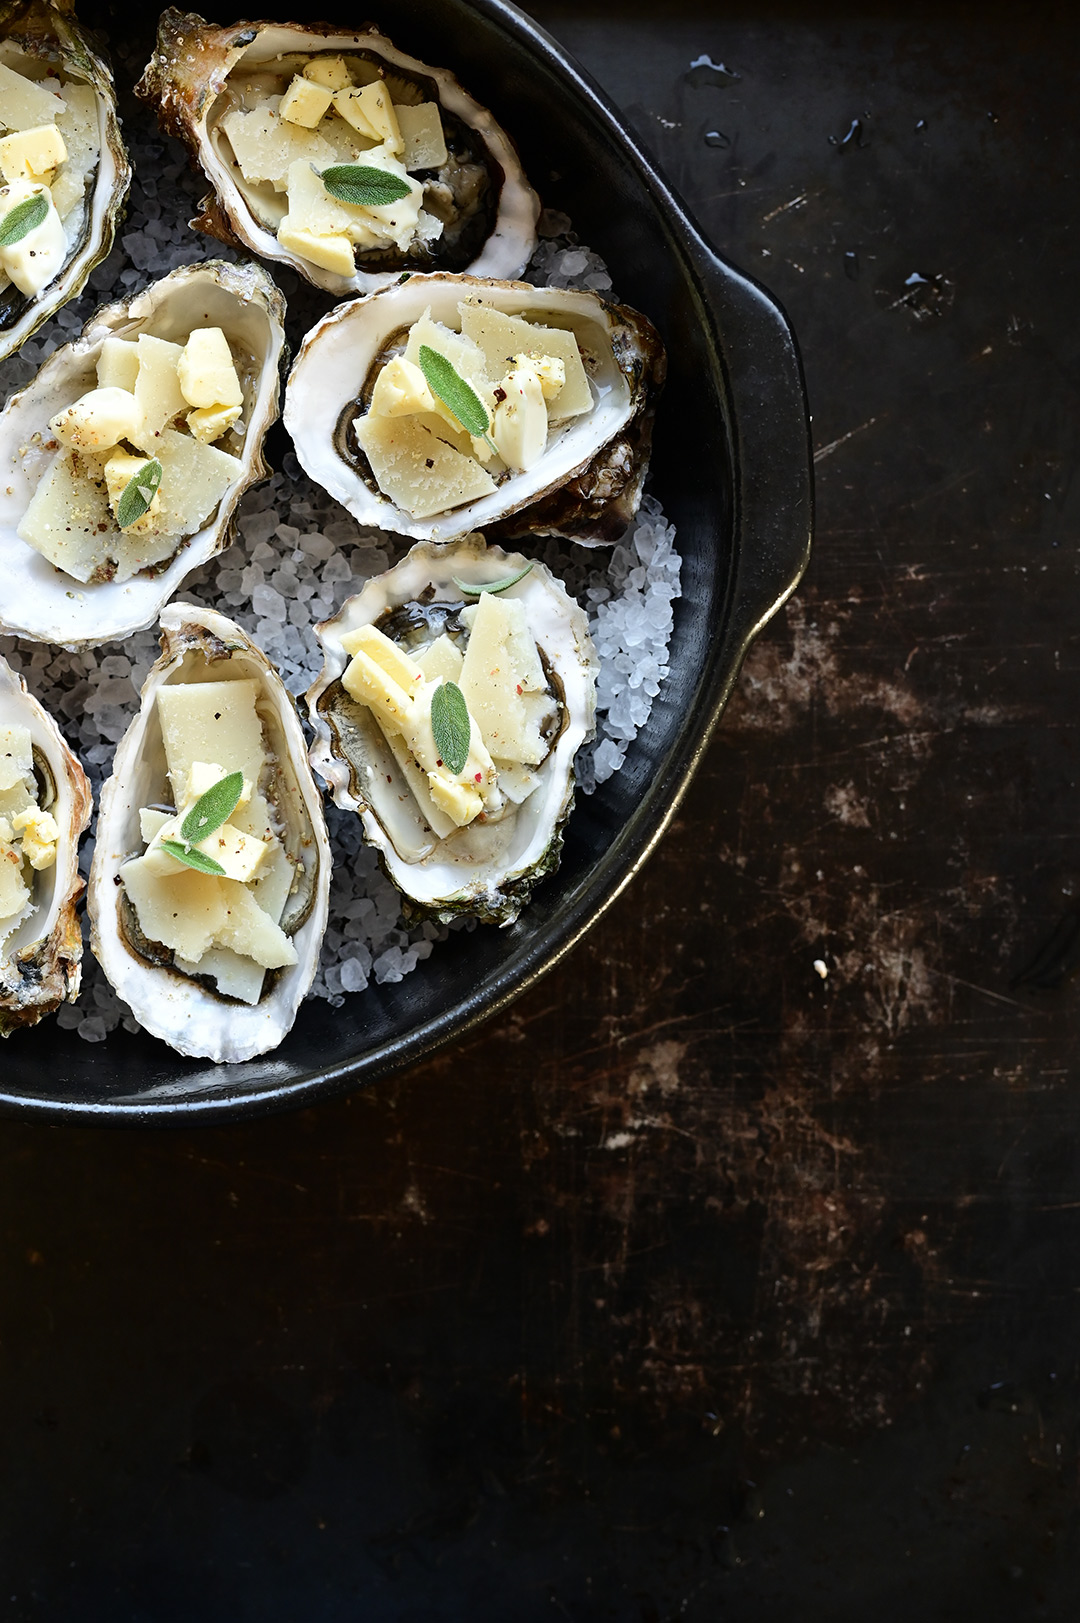 serving dumplings | Roasted oysters with parmigiano, aïoli and sage butter